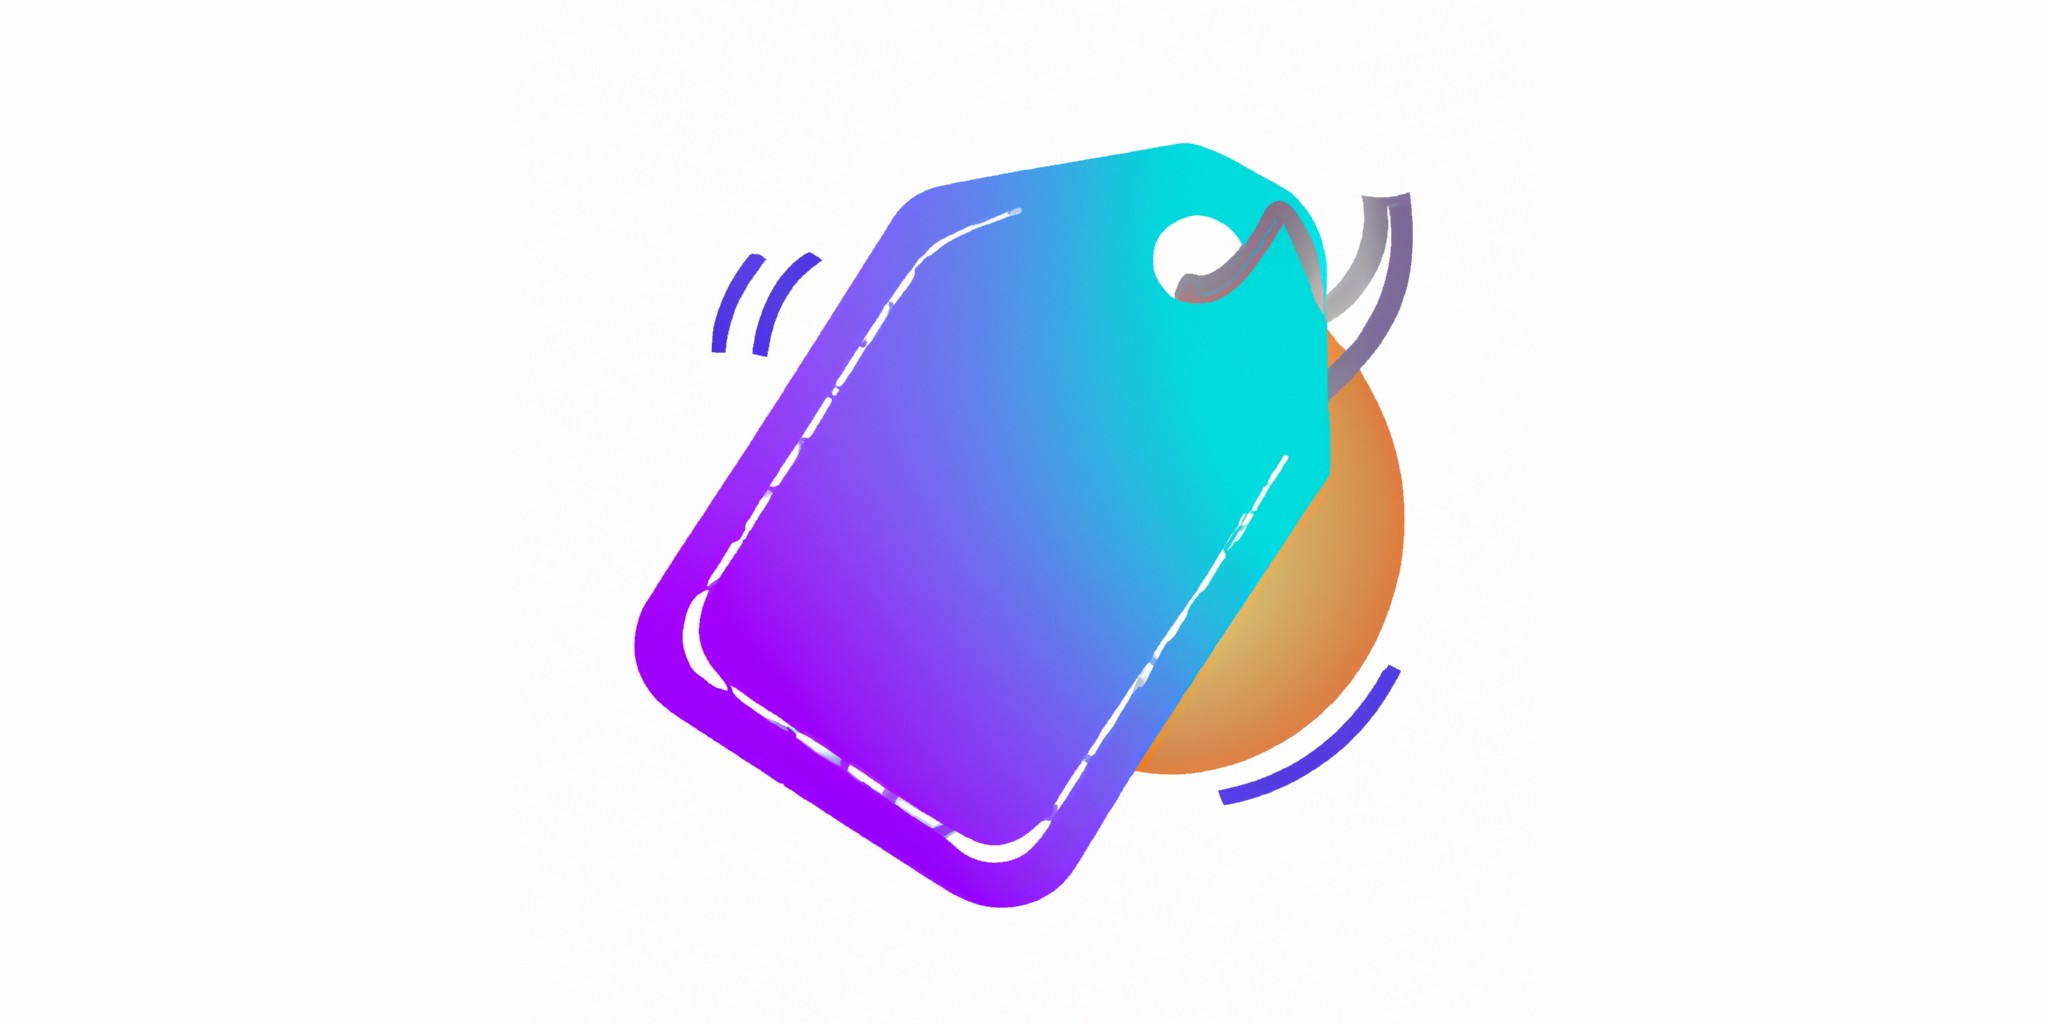 a price tag in flat illustration style with gradients and white background